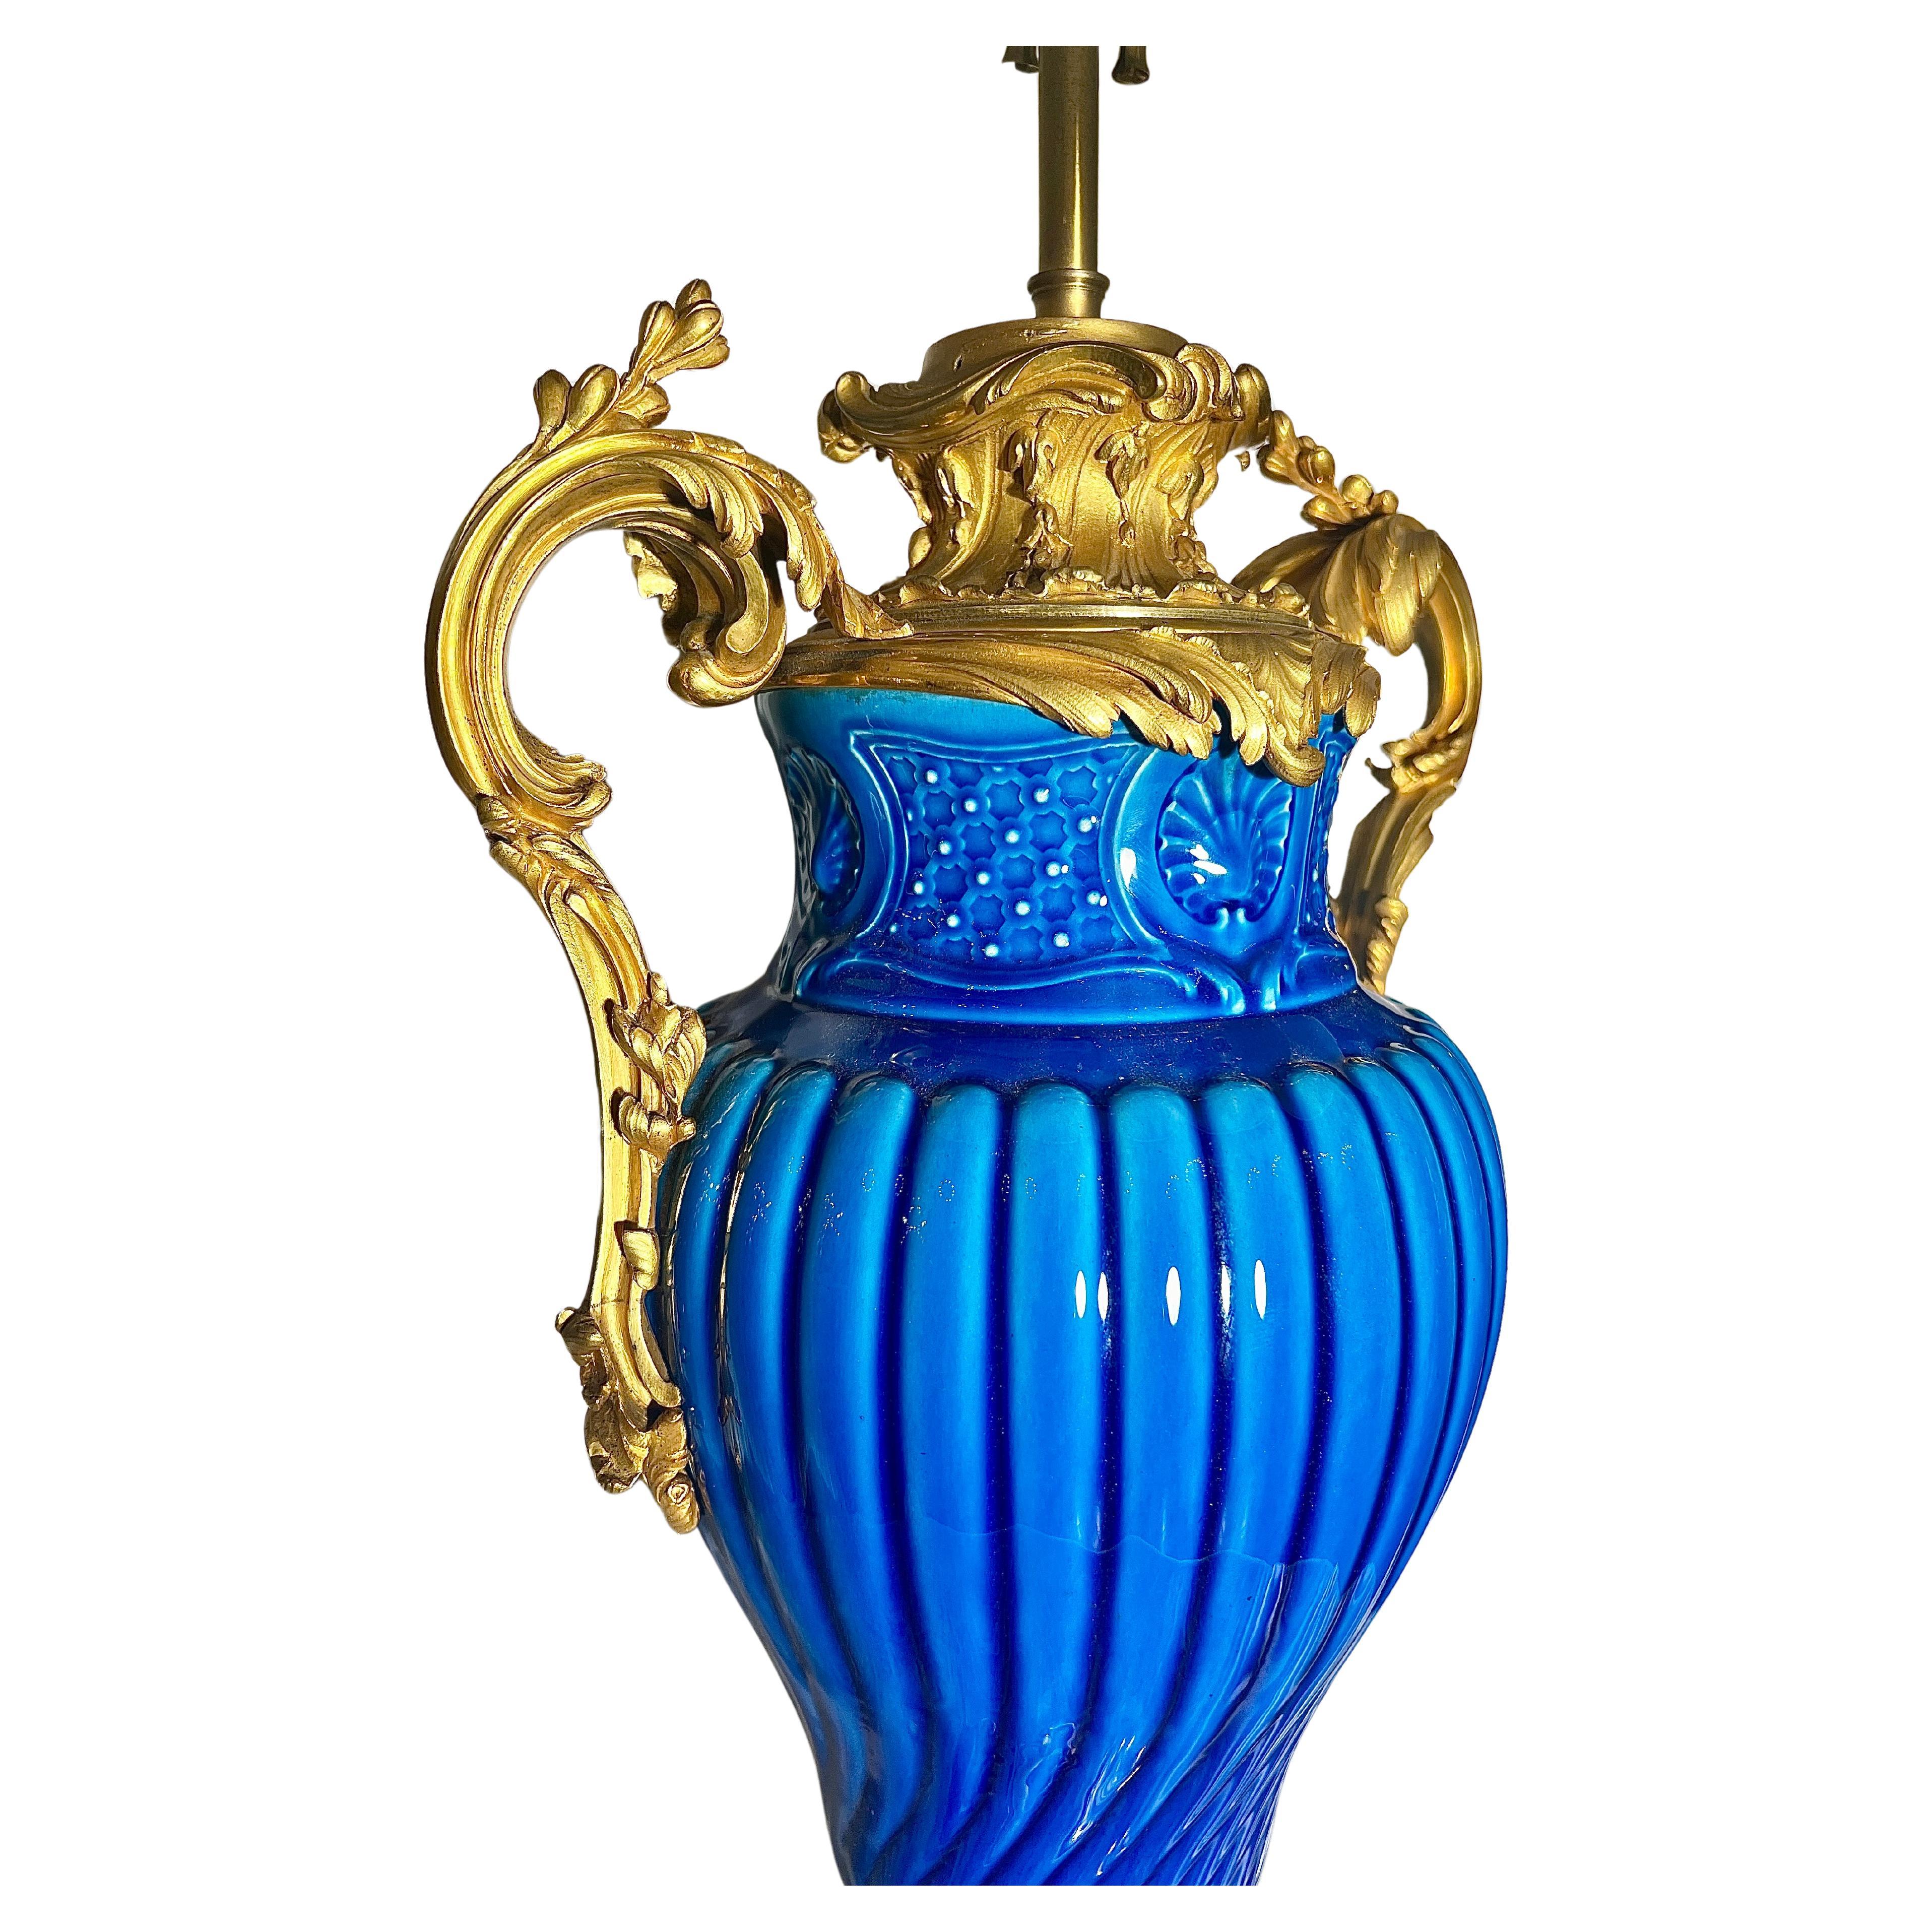 Museum Quality Antique 19th Century French Blue Porcelain Lamp with Ormolu Mounts.